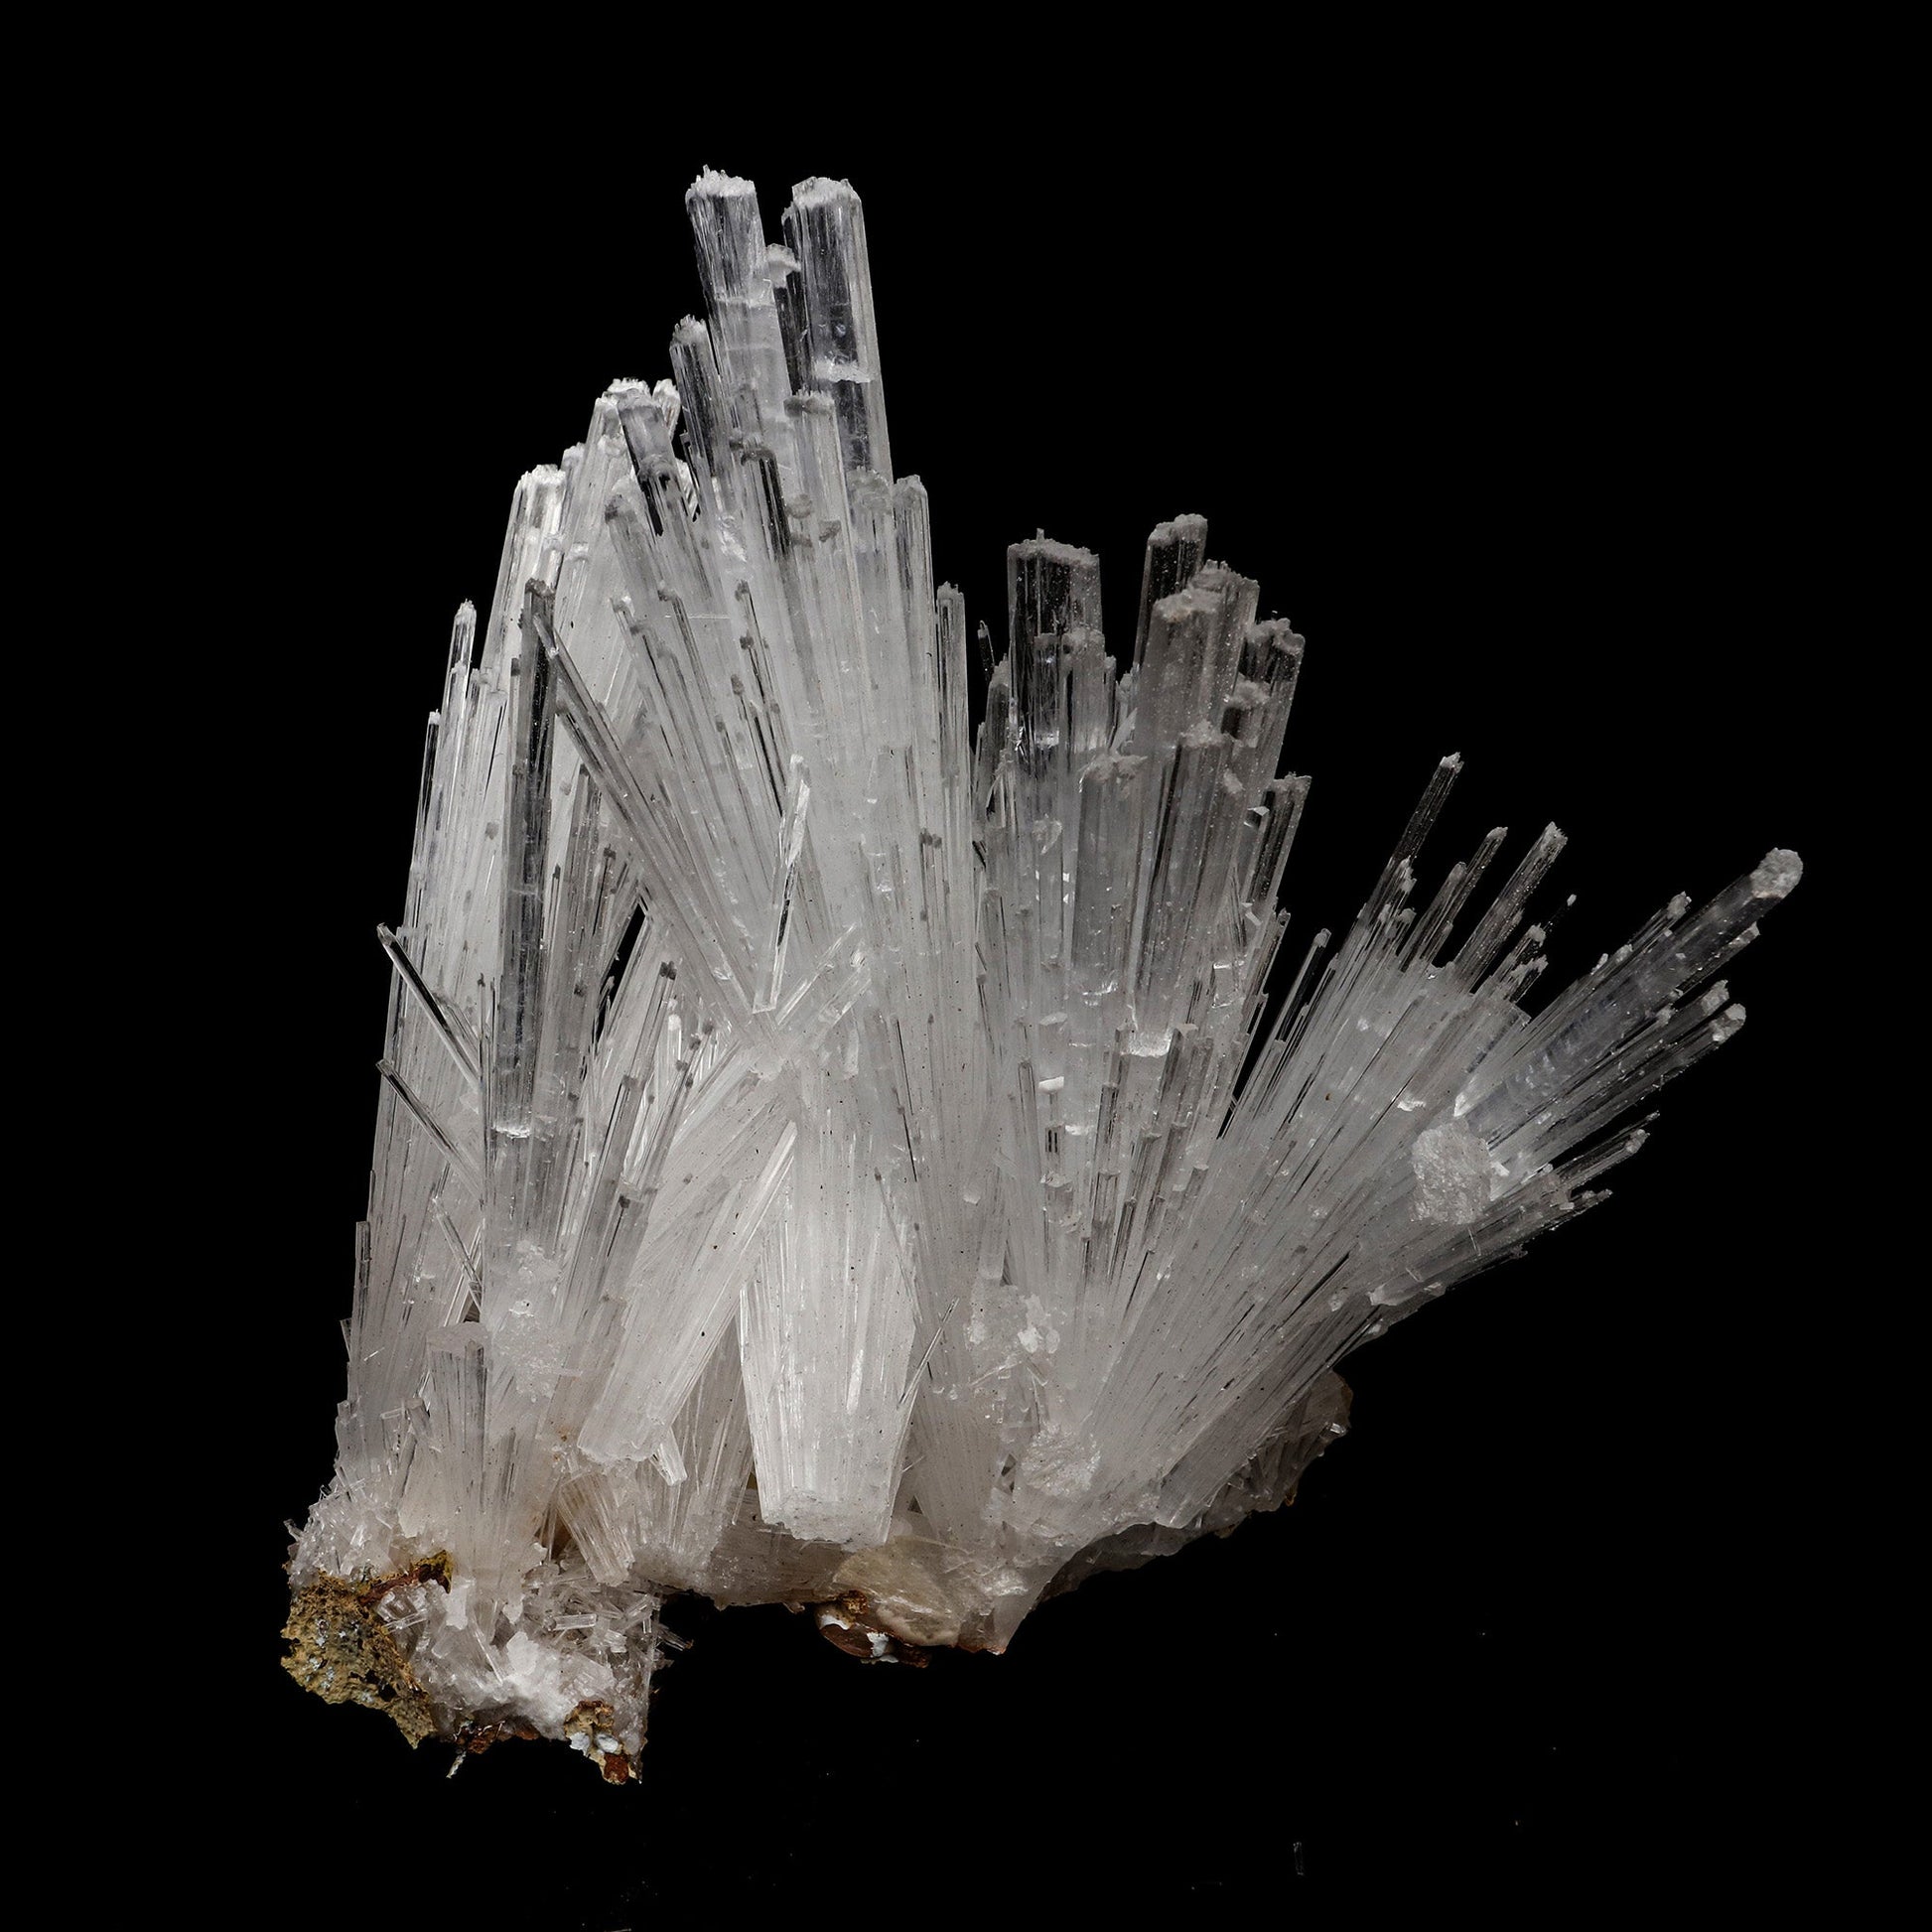 Scolecite Intergrown Sprays on Stilbite Natural Mineral Specimen # B …  https://www.superbminerals.us/products/scolecite-intergrown-sprays-natural-mineral-specimen-b-5207  Features: Recent discoveries in Nashik have yielded some spectacular intergrown jackstraw sprays of glassy, iridescent, clear to translucent scolecite prism. STUNNING. The stunning crystals extend in every direction. Primary Mineral(s): ScoleciteSecondary Mineral(s): N/AMatrix: N/A 6 Inch x 5 InchWeight : 505 